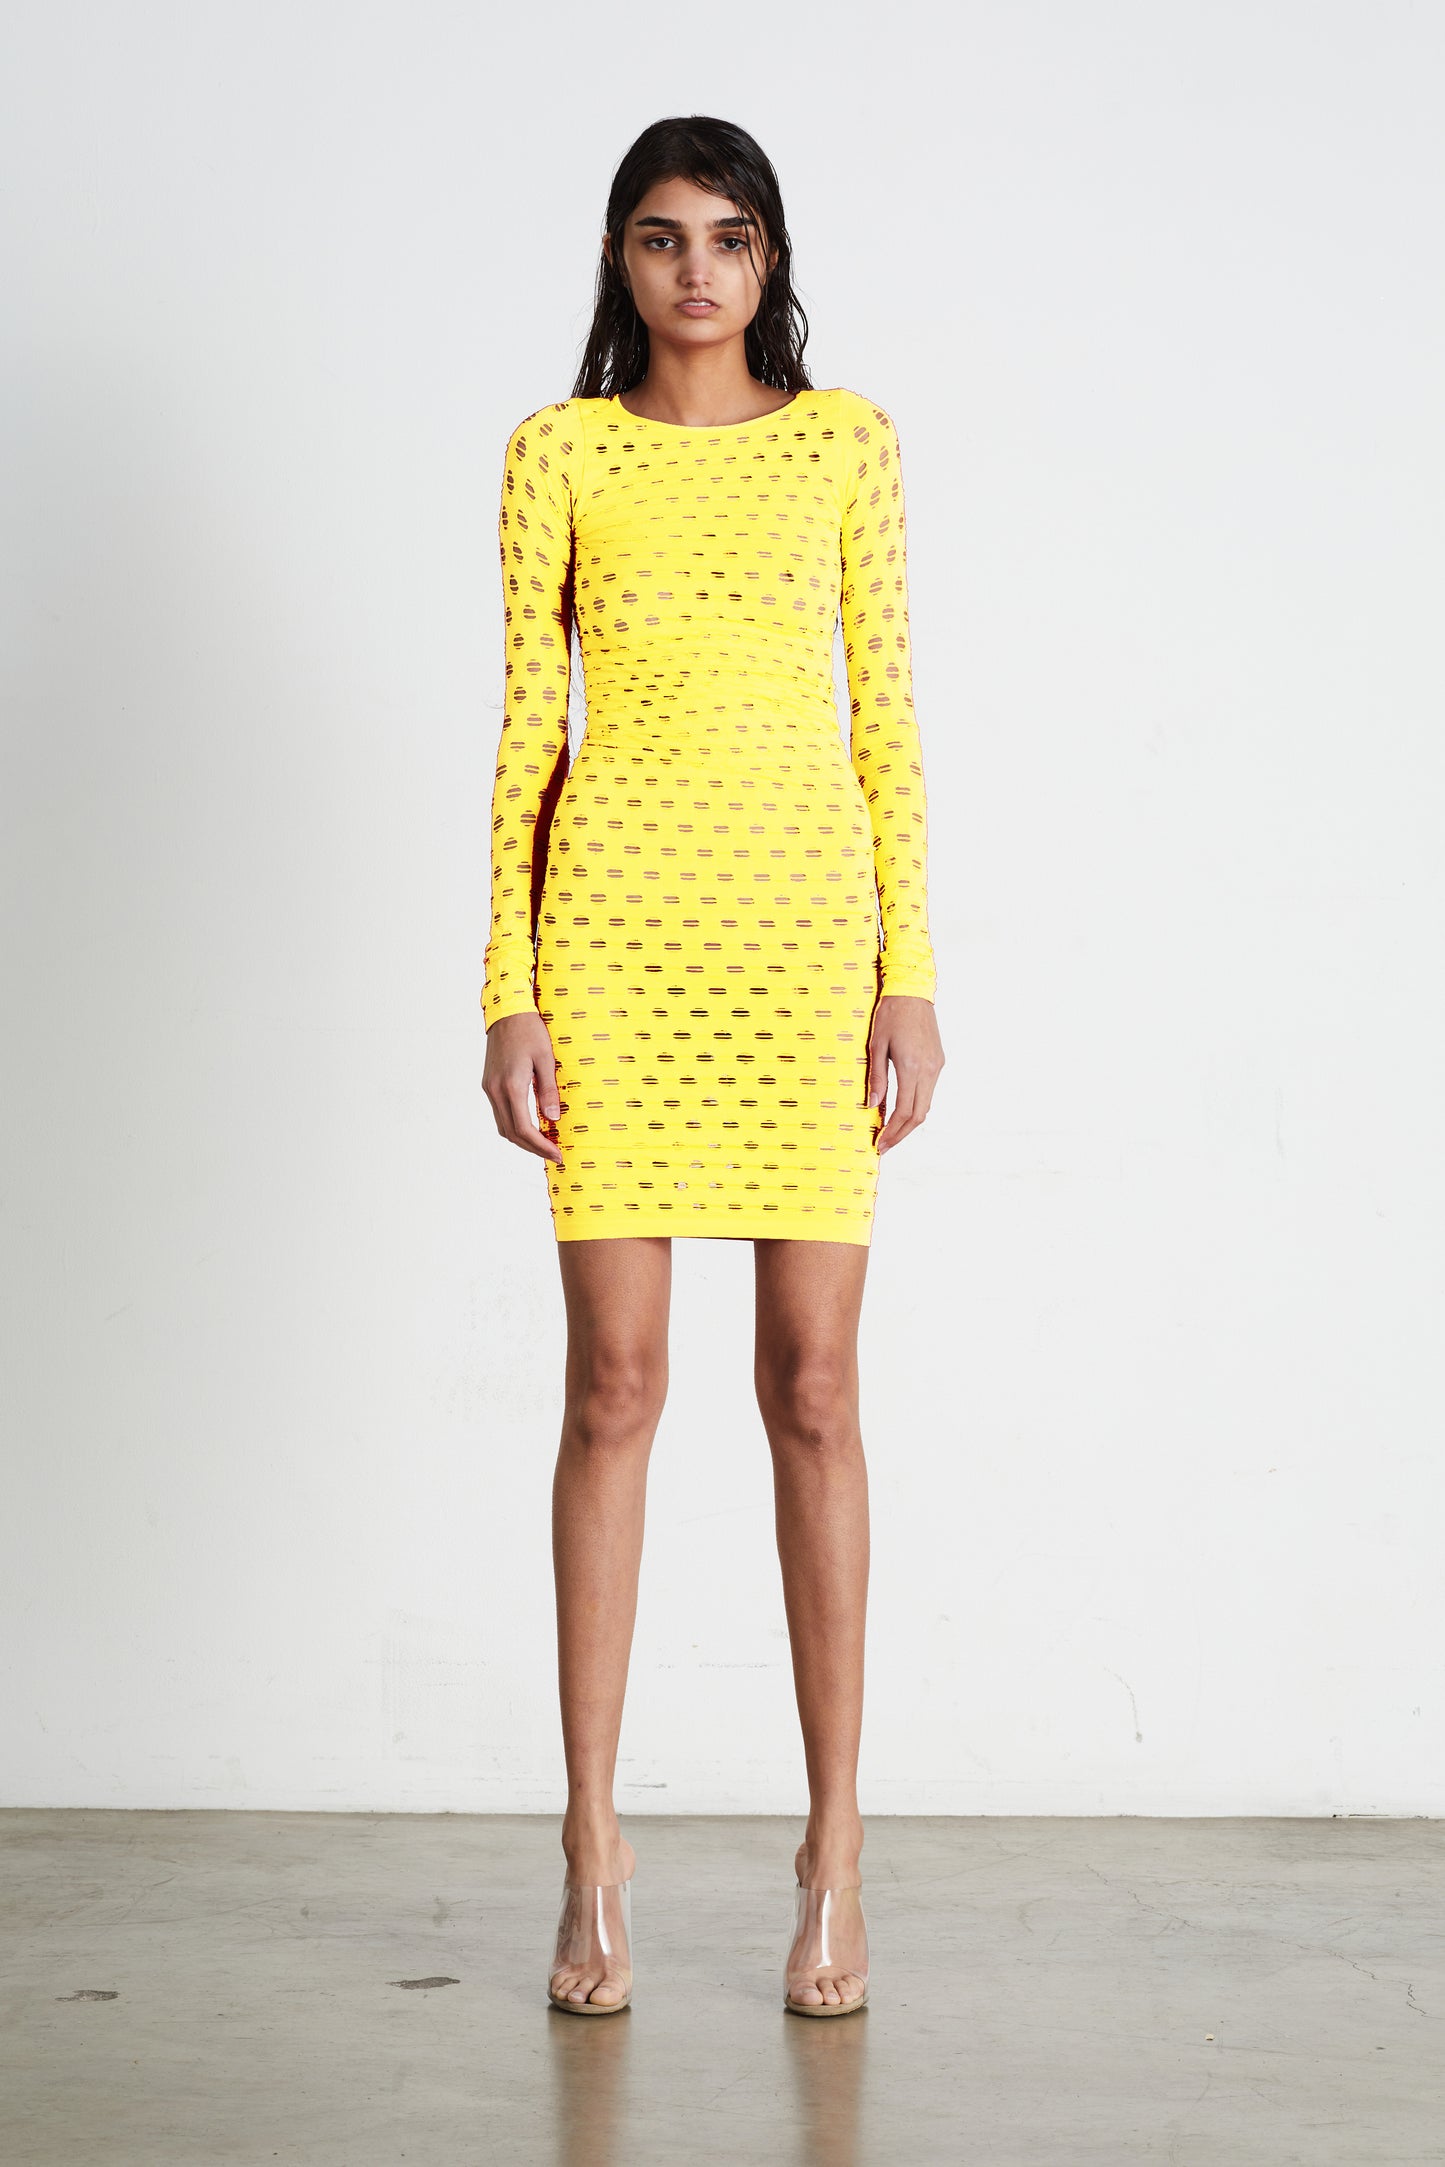 PERFORATED DRESS